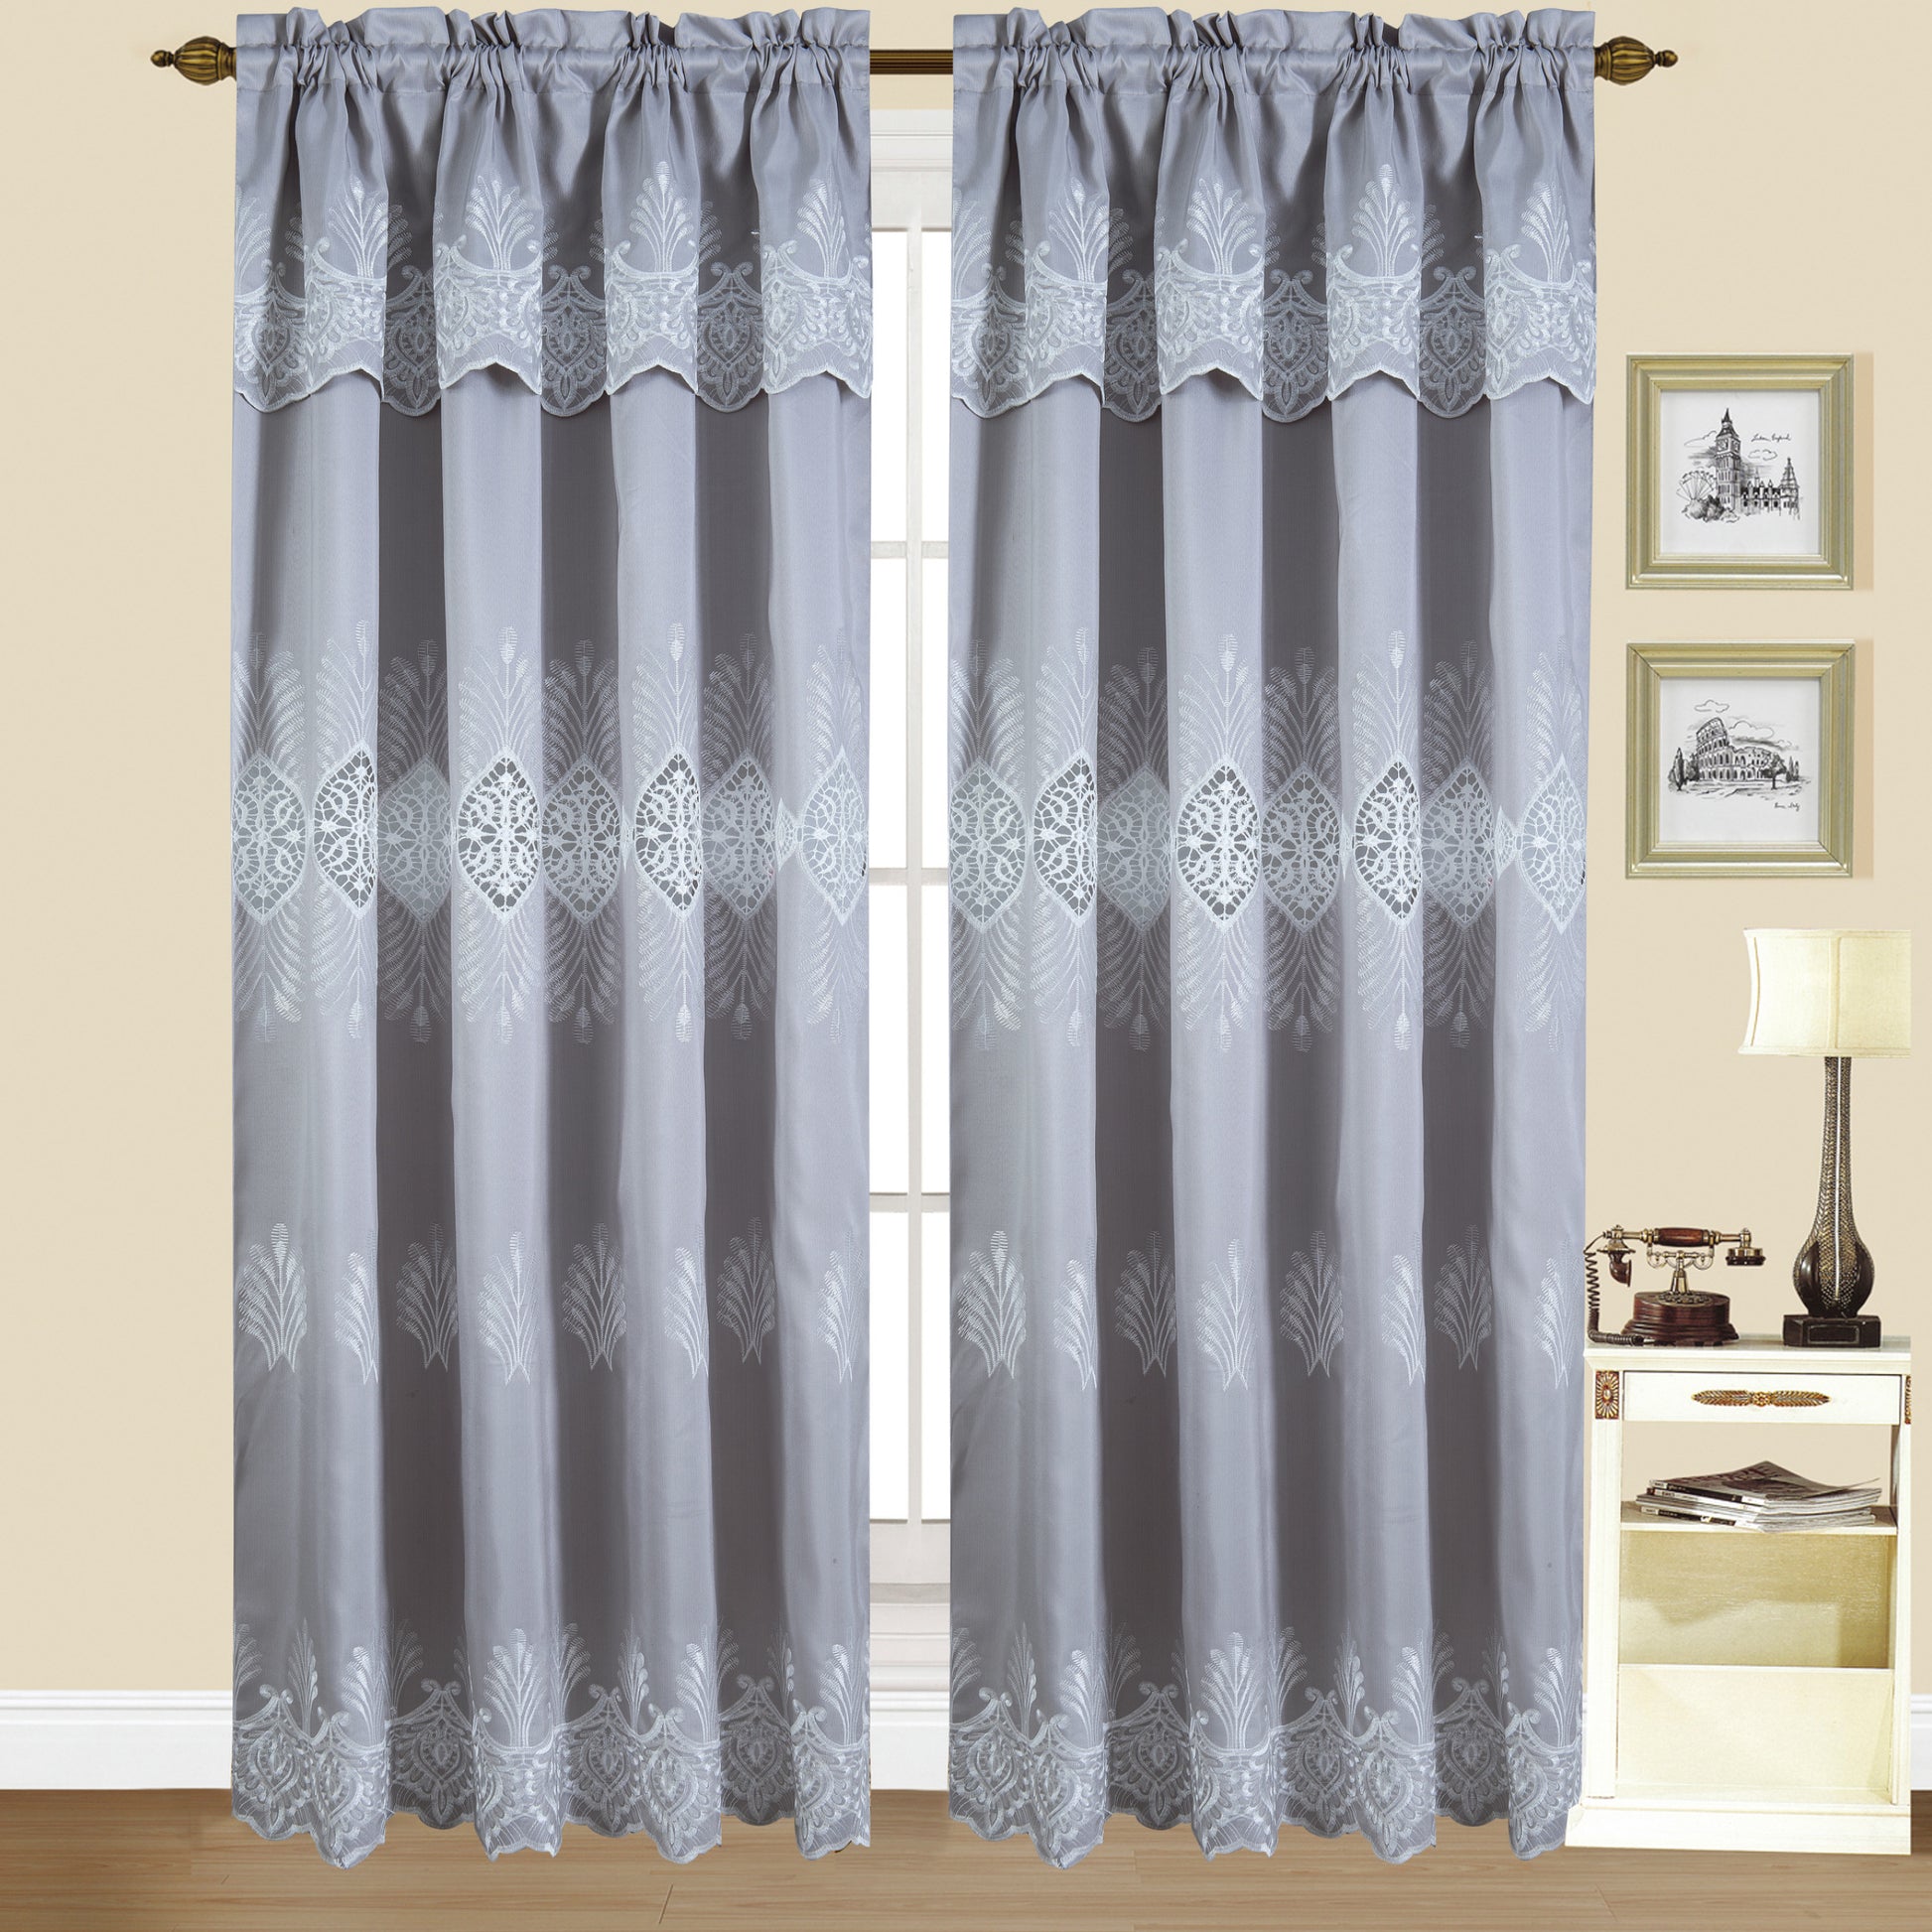 Alice - Embroidered Macrame Jacquard Panel with Valance - Glory Home Design